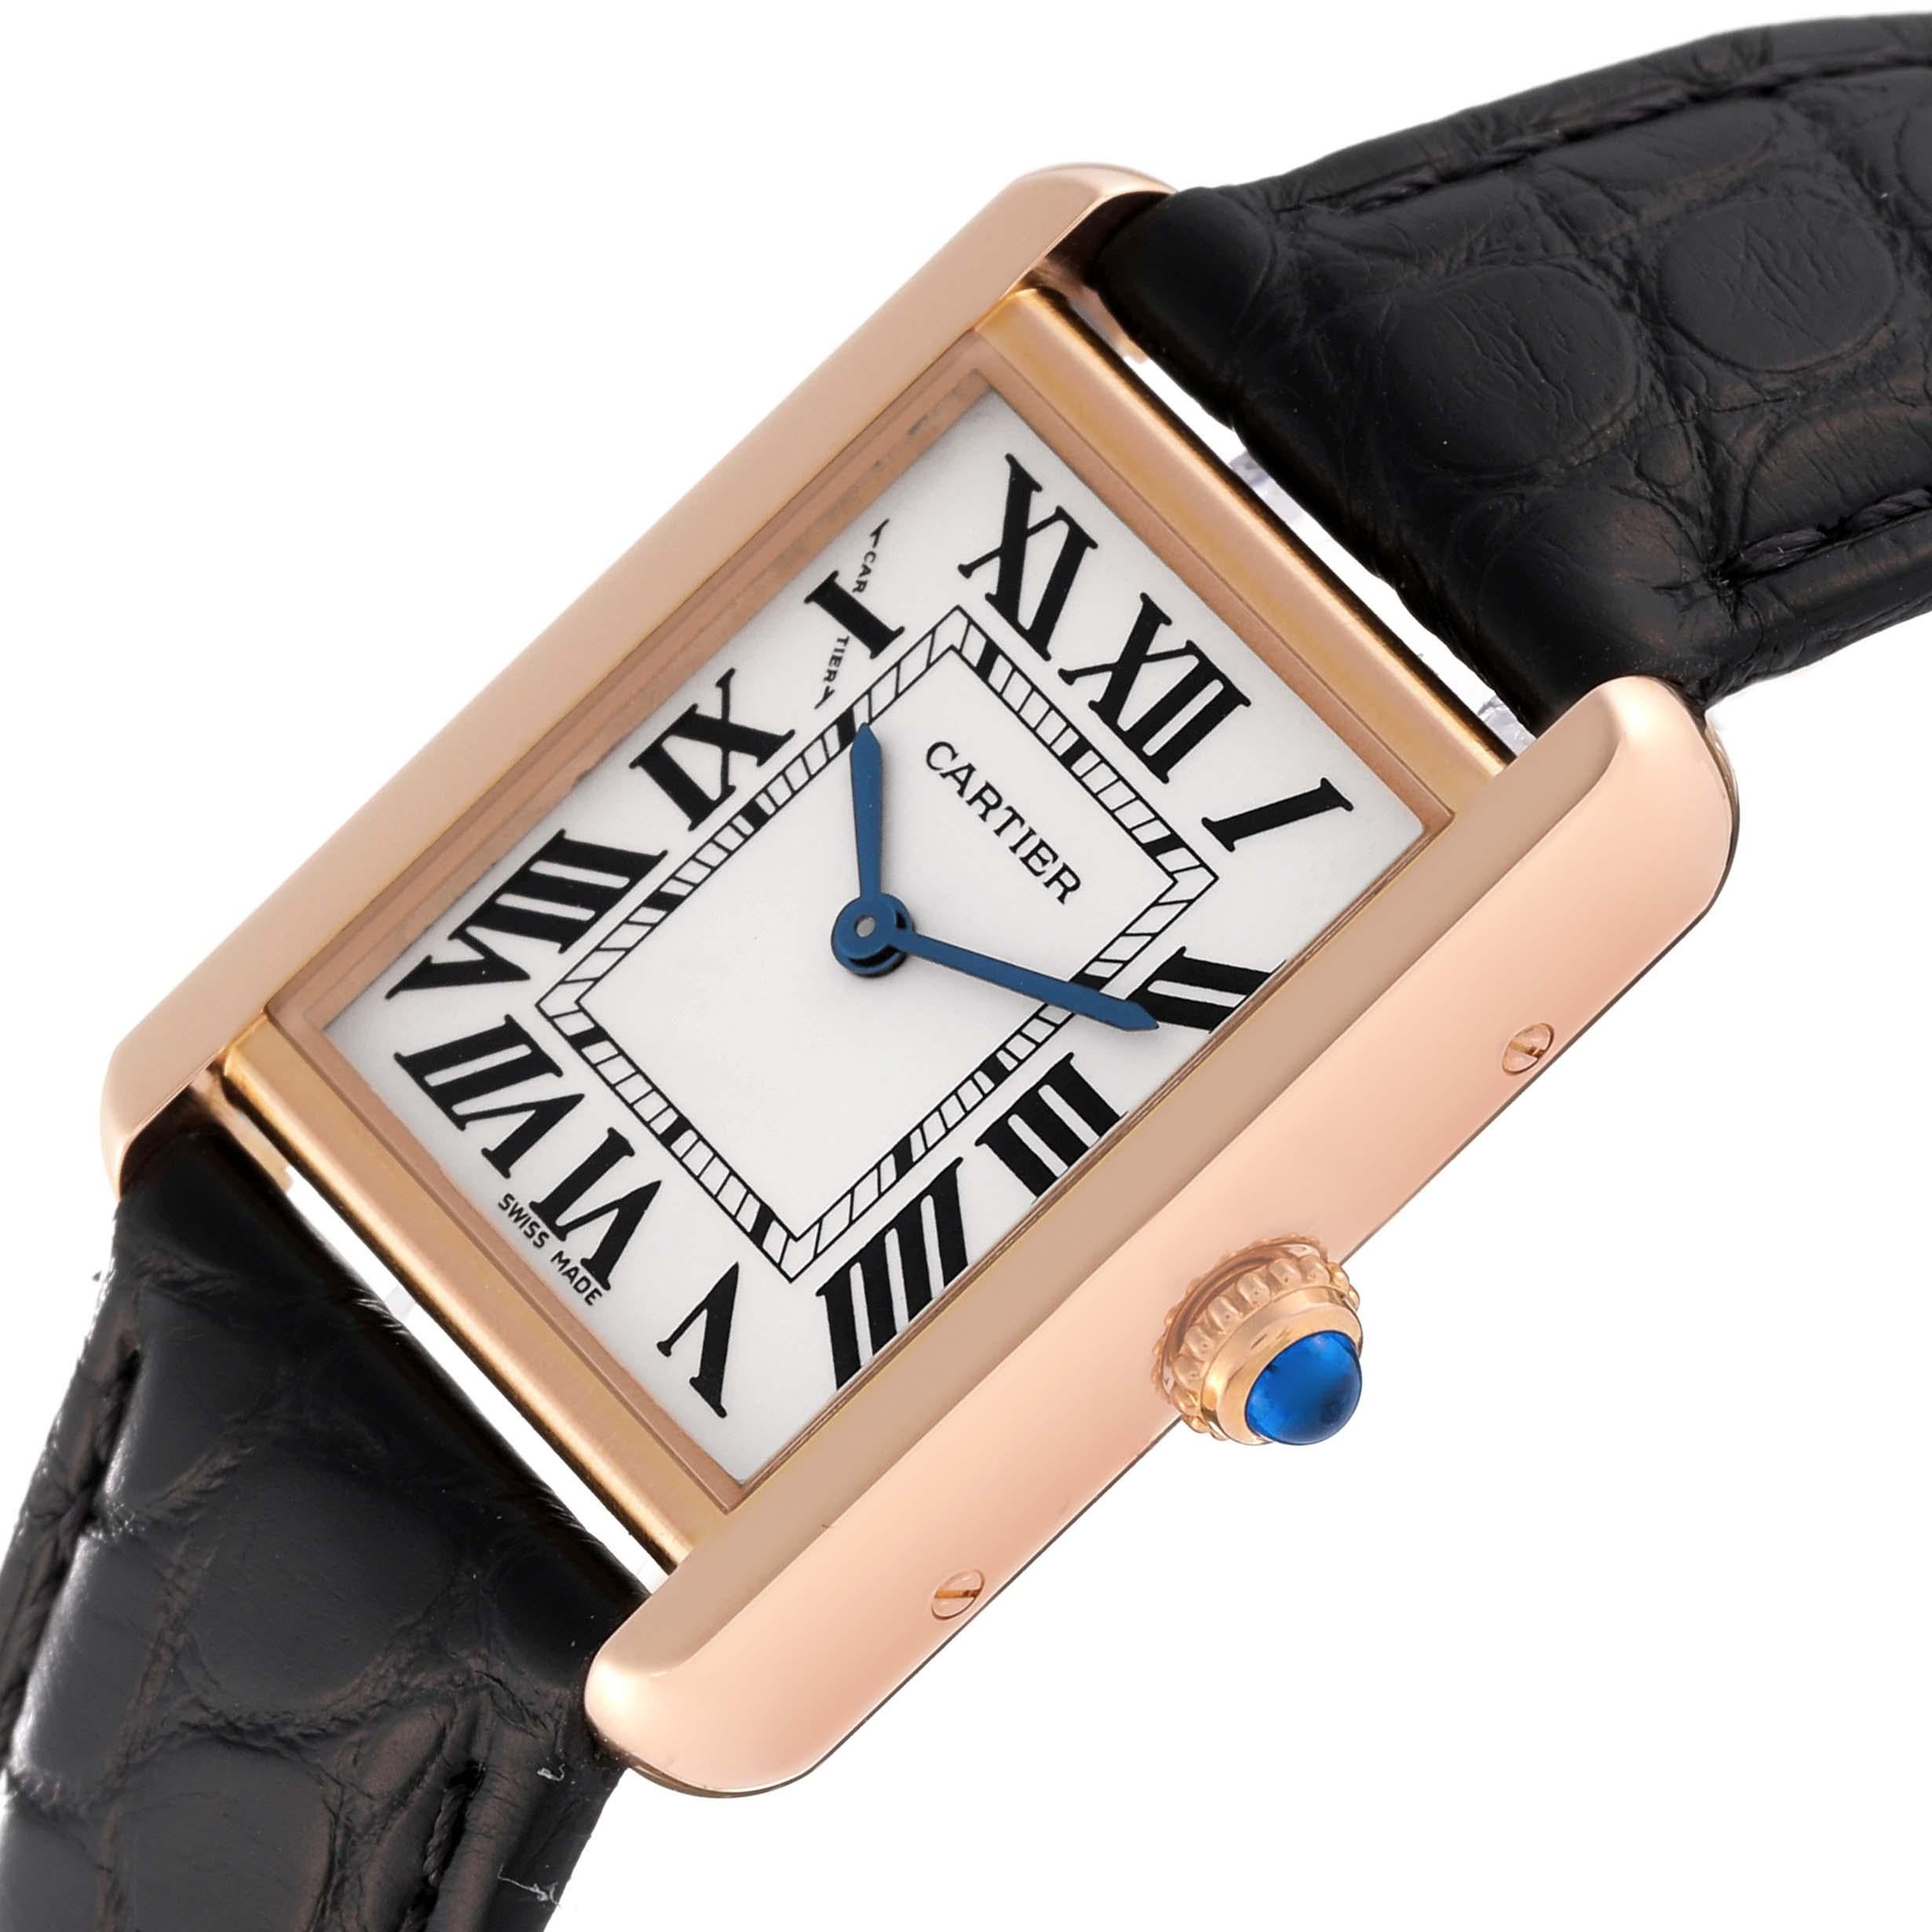 Cartier Tank Solo Silver Dial Rose Gold Steel Ladies Watch W5200024 Card. Quartz movement. 18k rose gold 30.0 x 24.4 mm case with stainless steel caseback. Circular grained crown set with blue spinel cabochon. . Scratch resistant sapphire crystal.